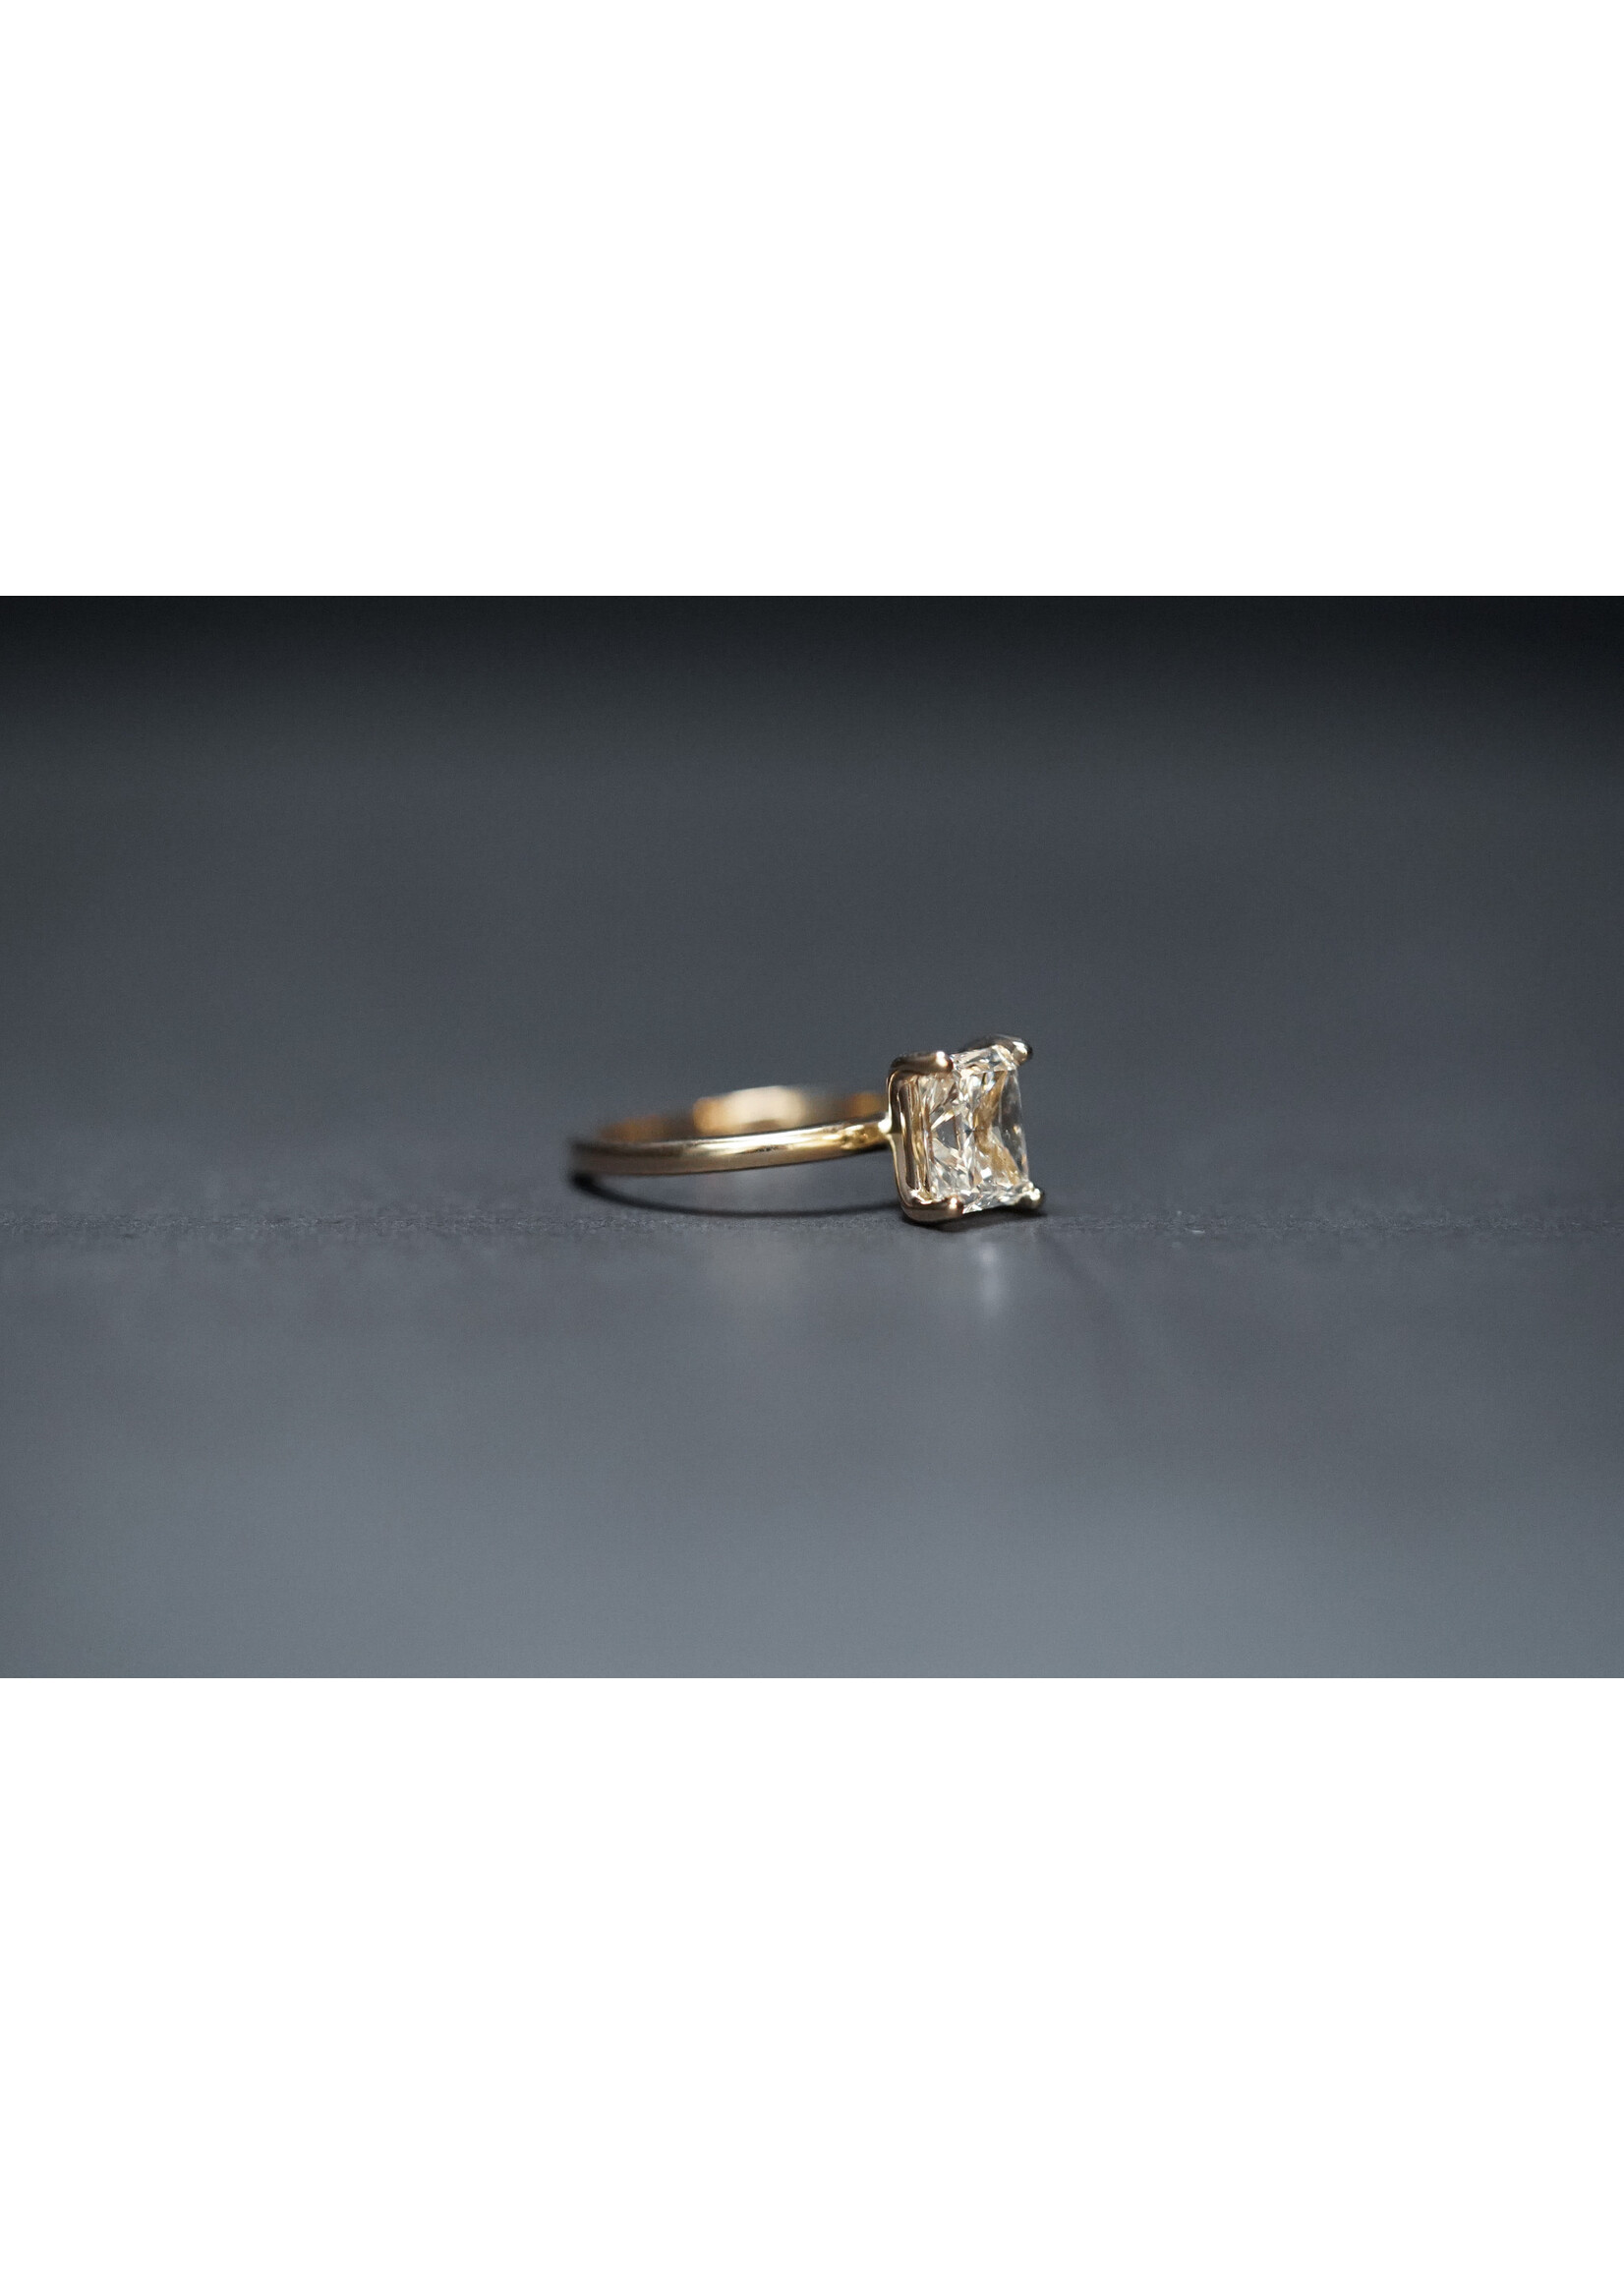 14KY 3.10g 2.00ct GIA J/SI2 Radiant Diamond Solitaire Engagement Ring (size 7)